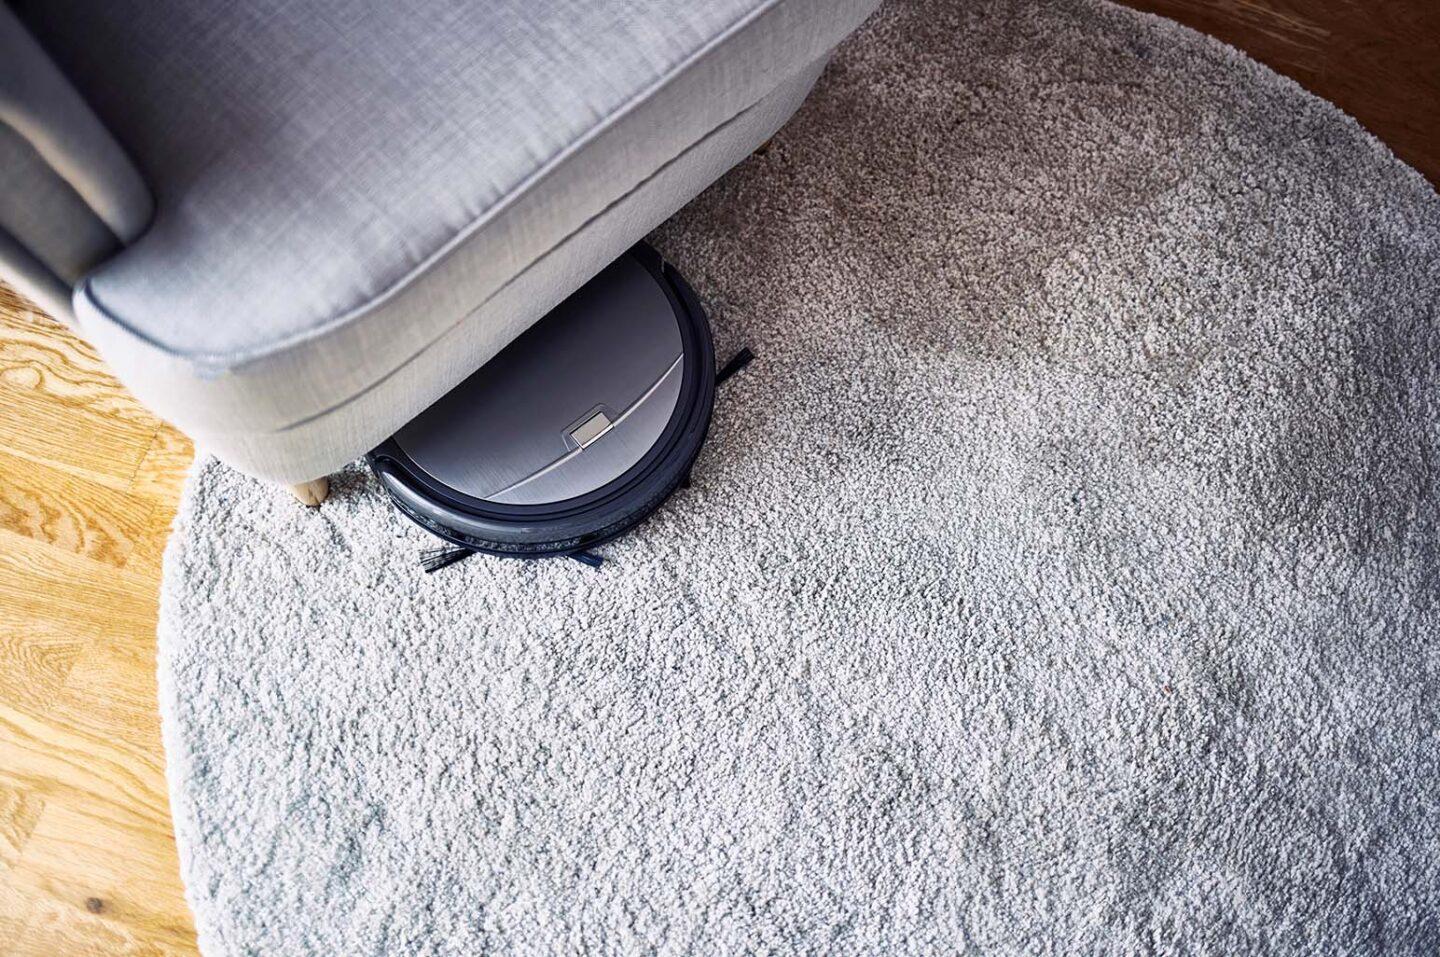 Roomba Won’t Connect to Wi-Fi: How to Fix It